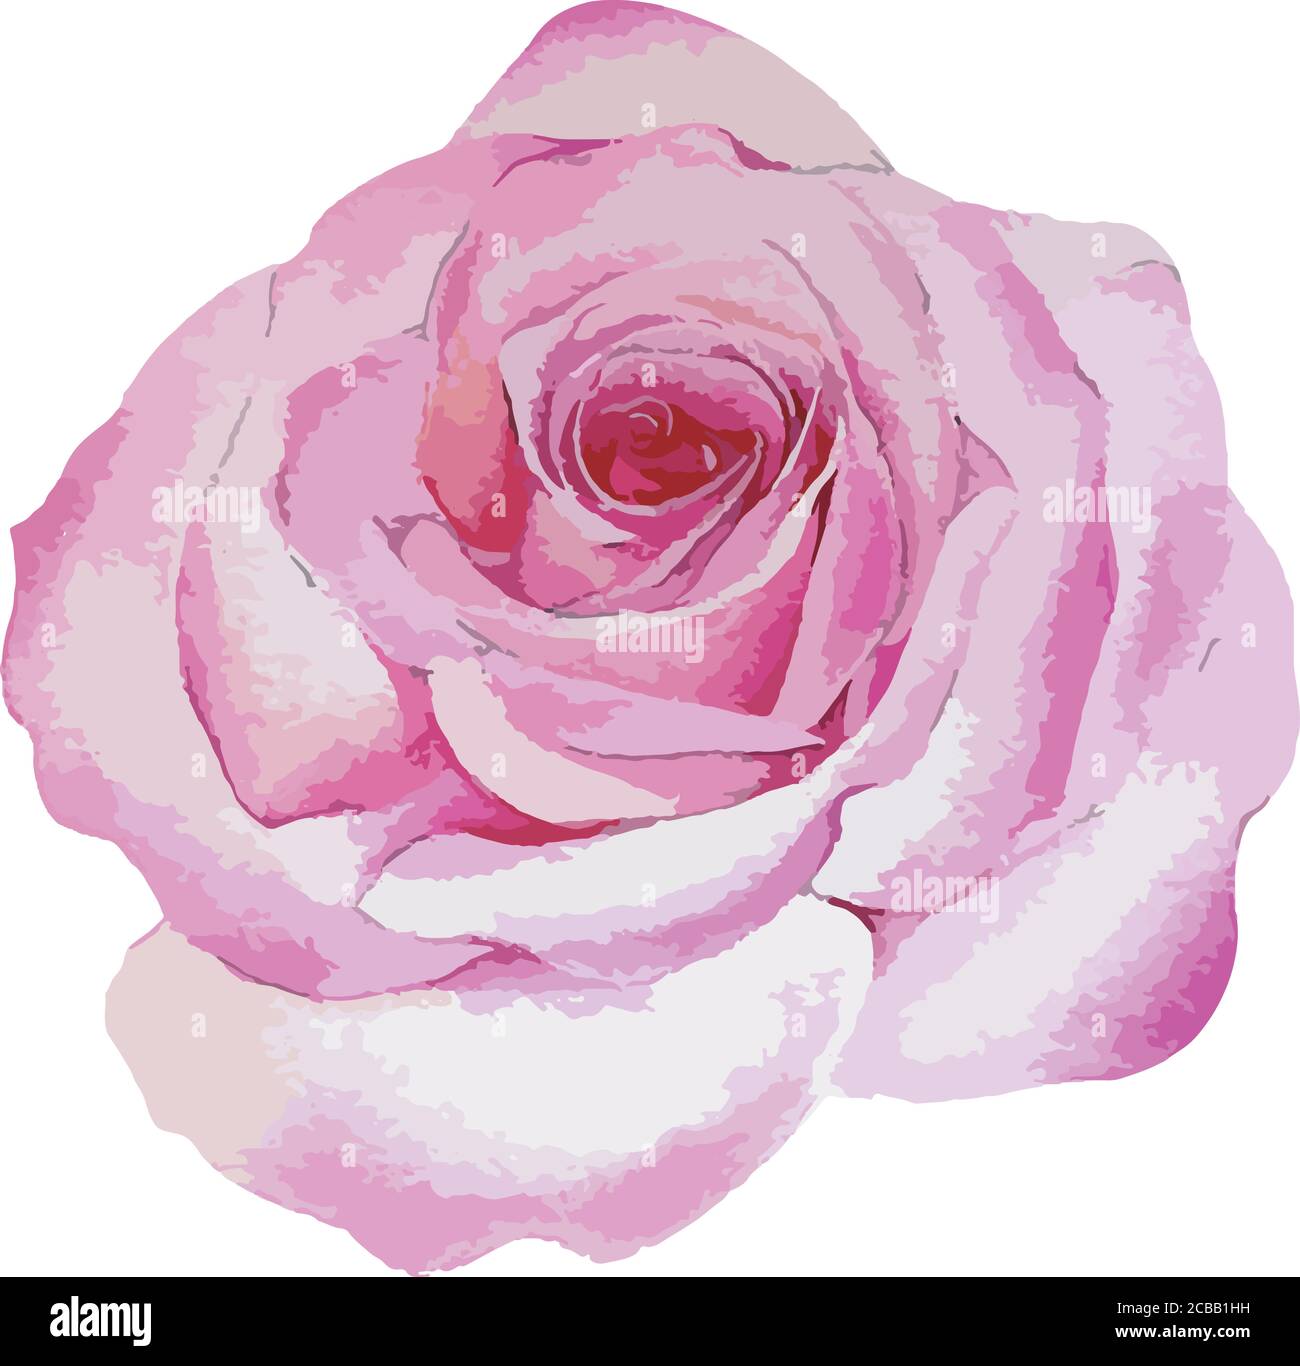 Vector illustration of rose watercolor Stock Vector